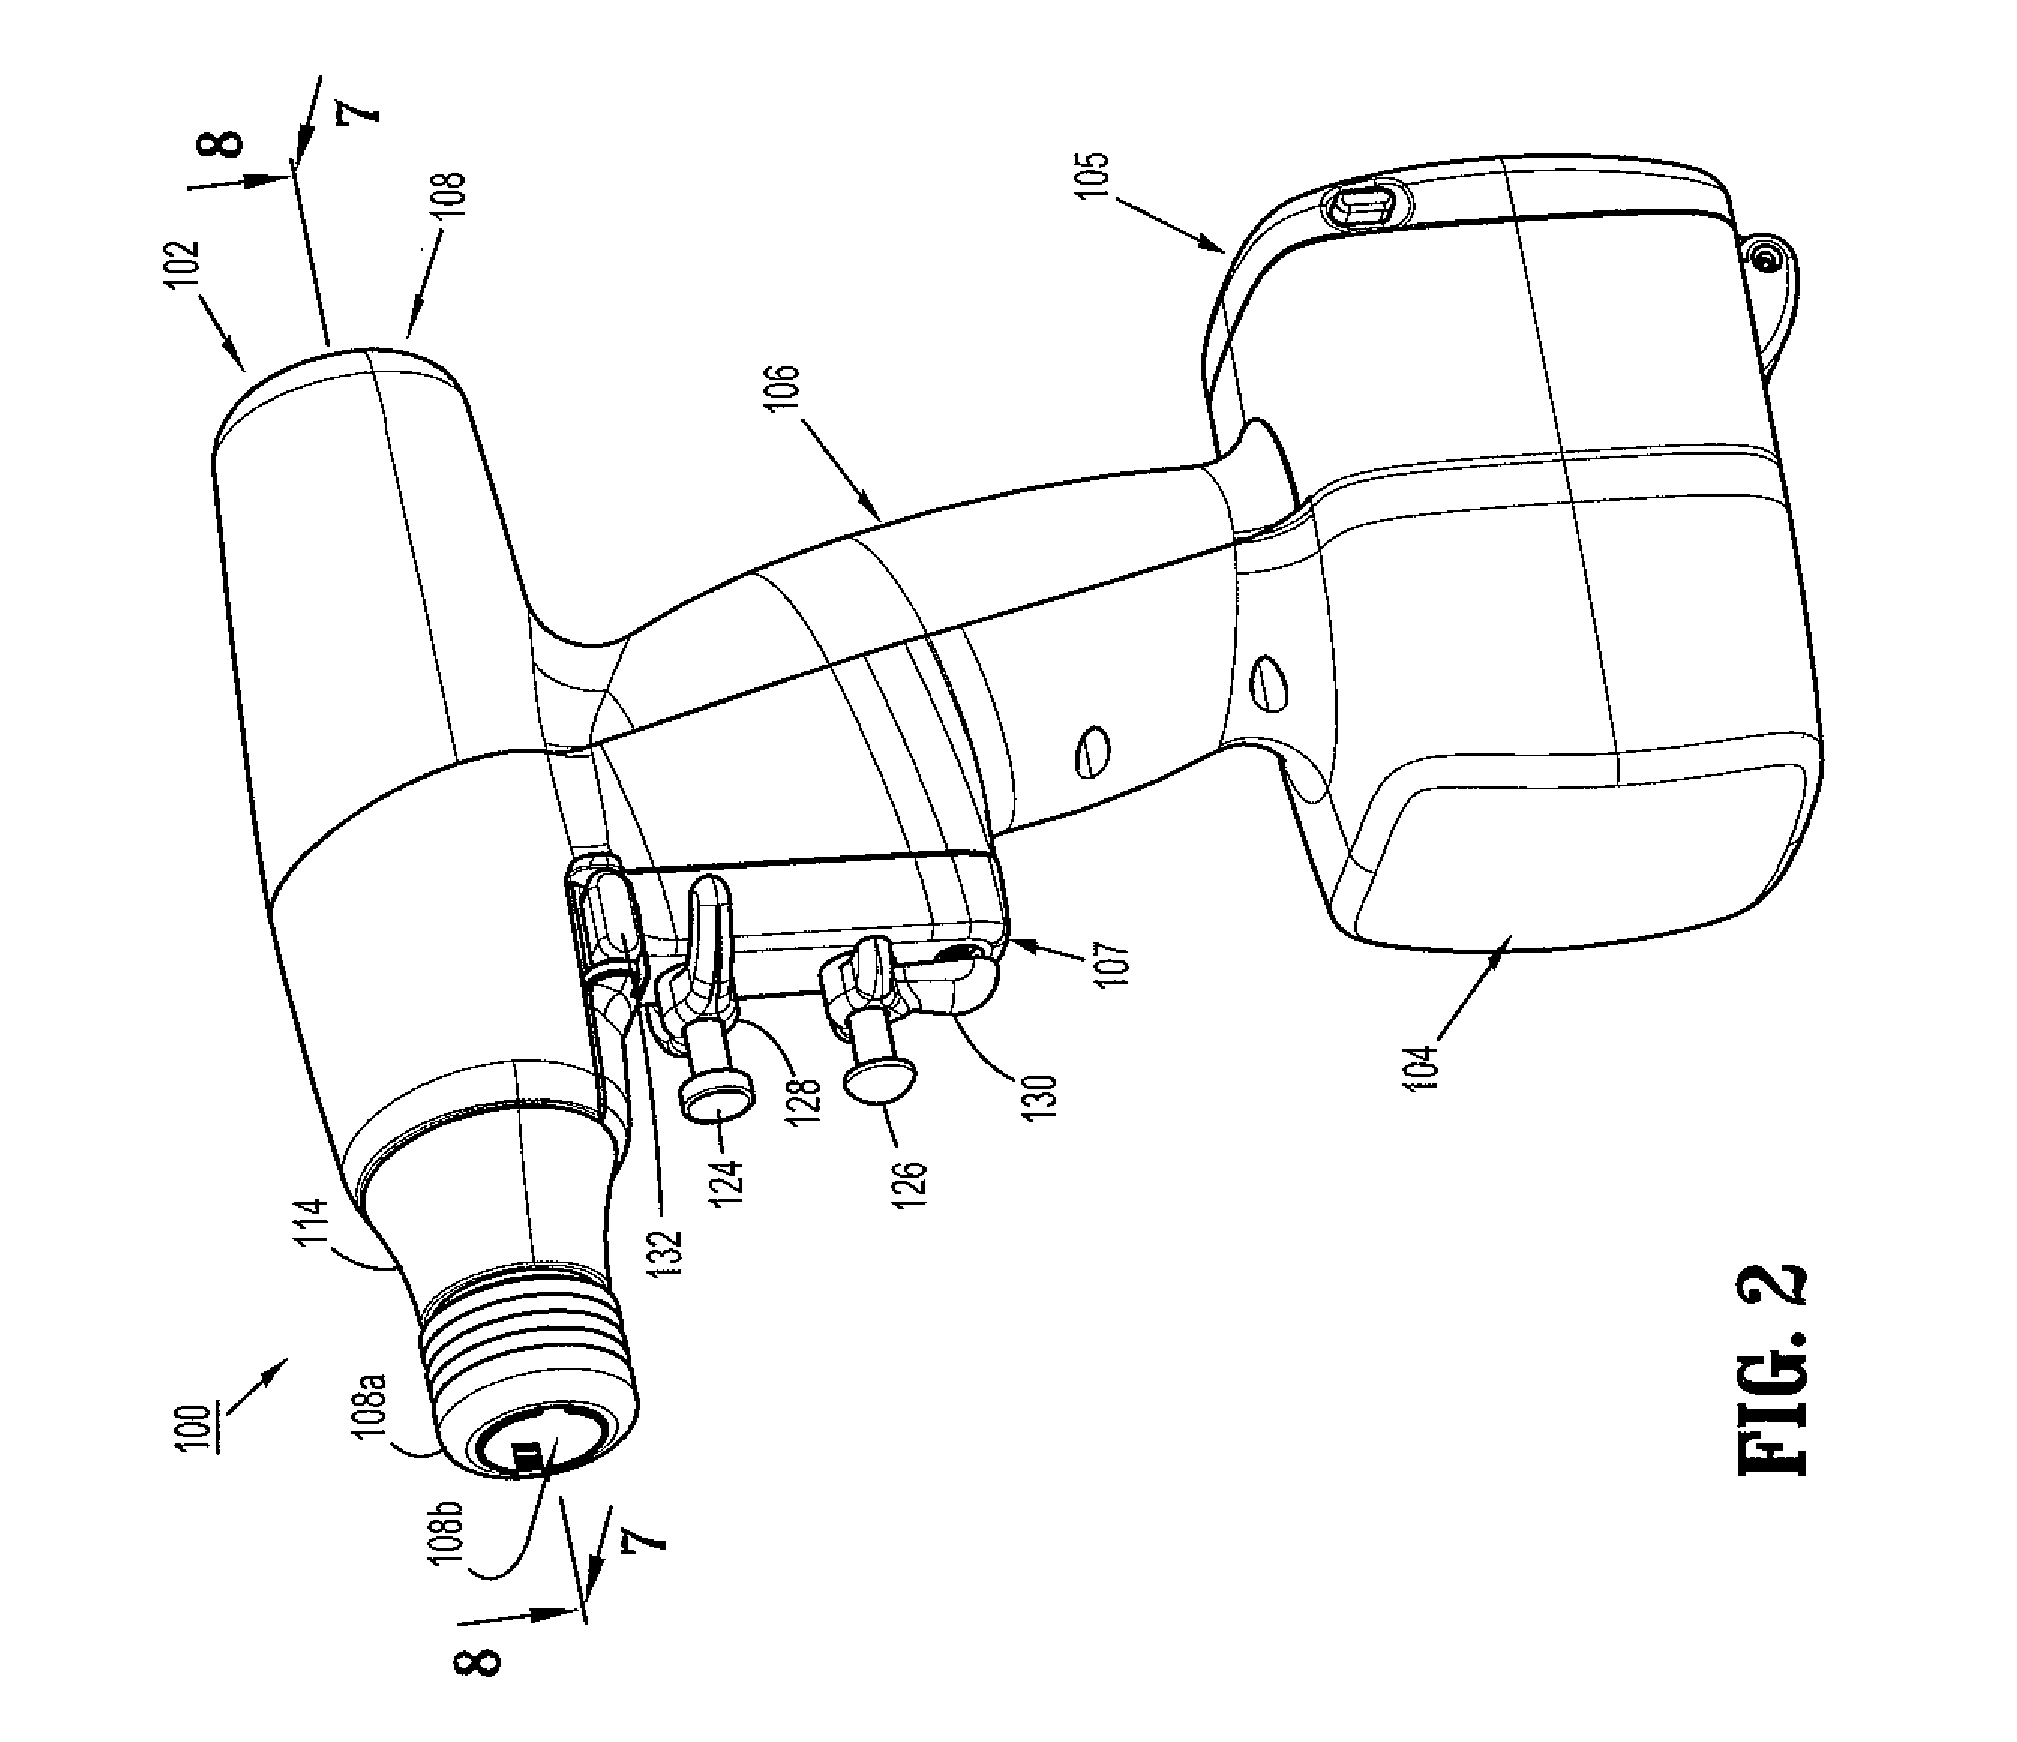 Hand held surgical handle assembly, surgical adapters for use between surgical handle assembly and surgical end effectors, and methods of use